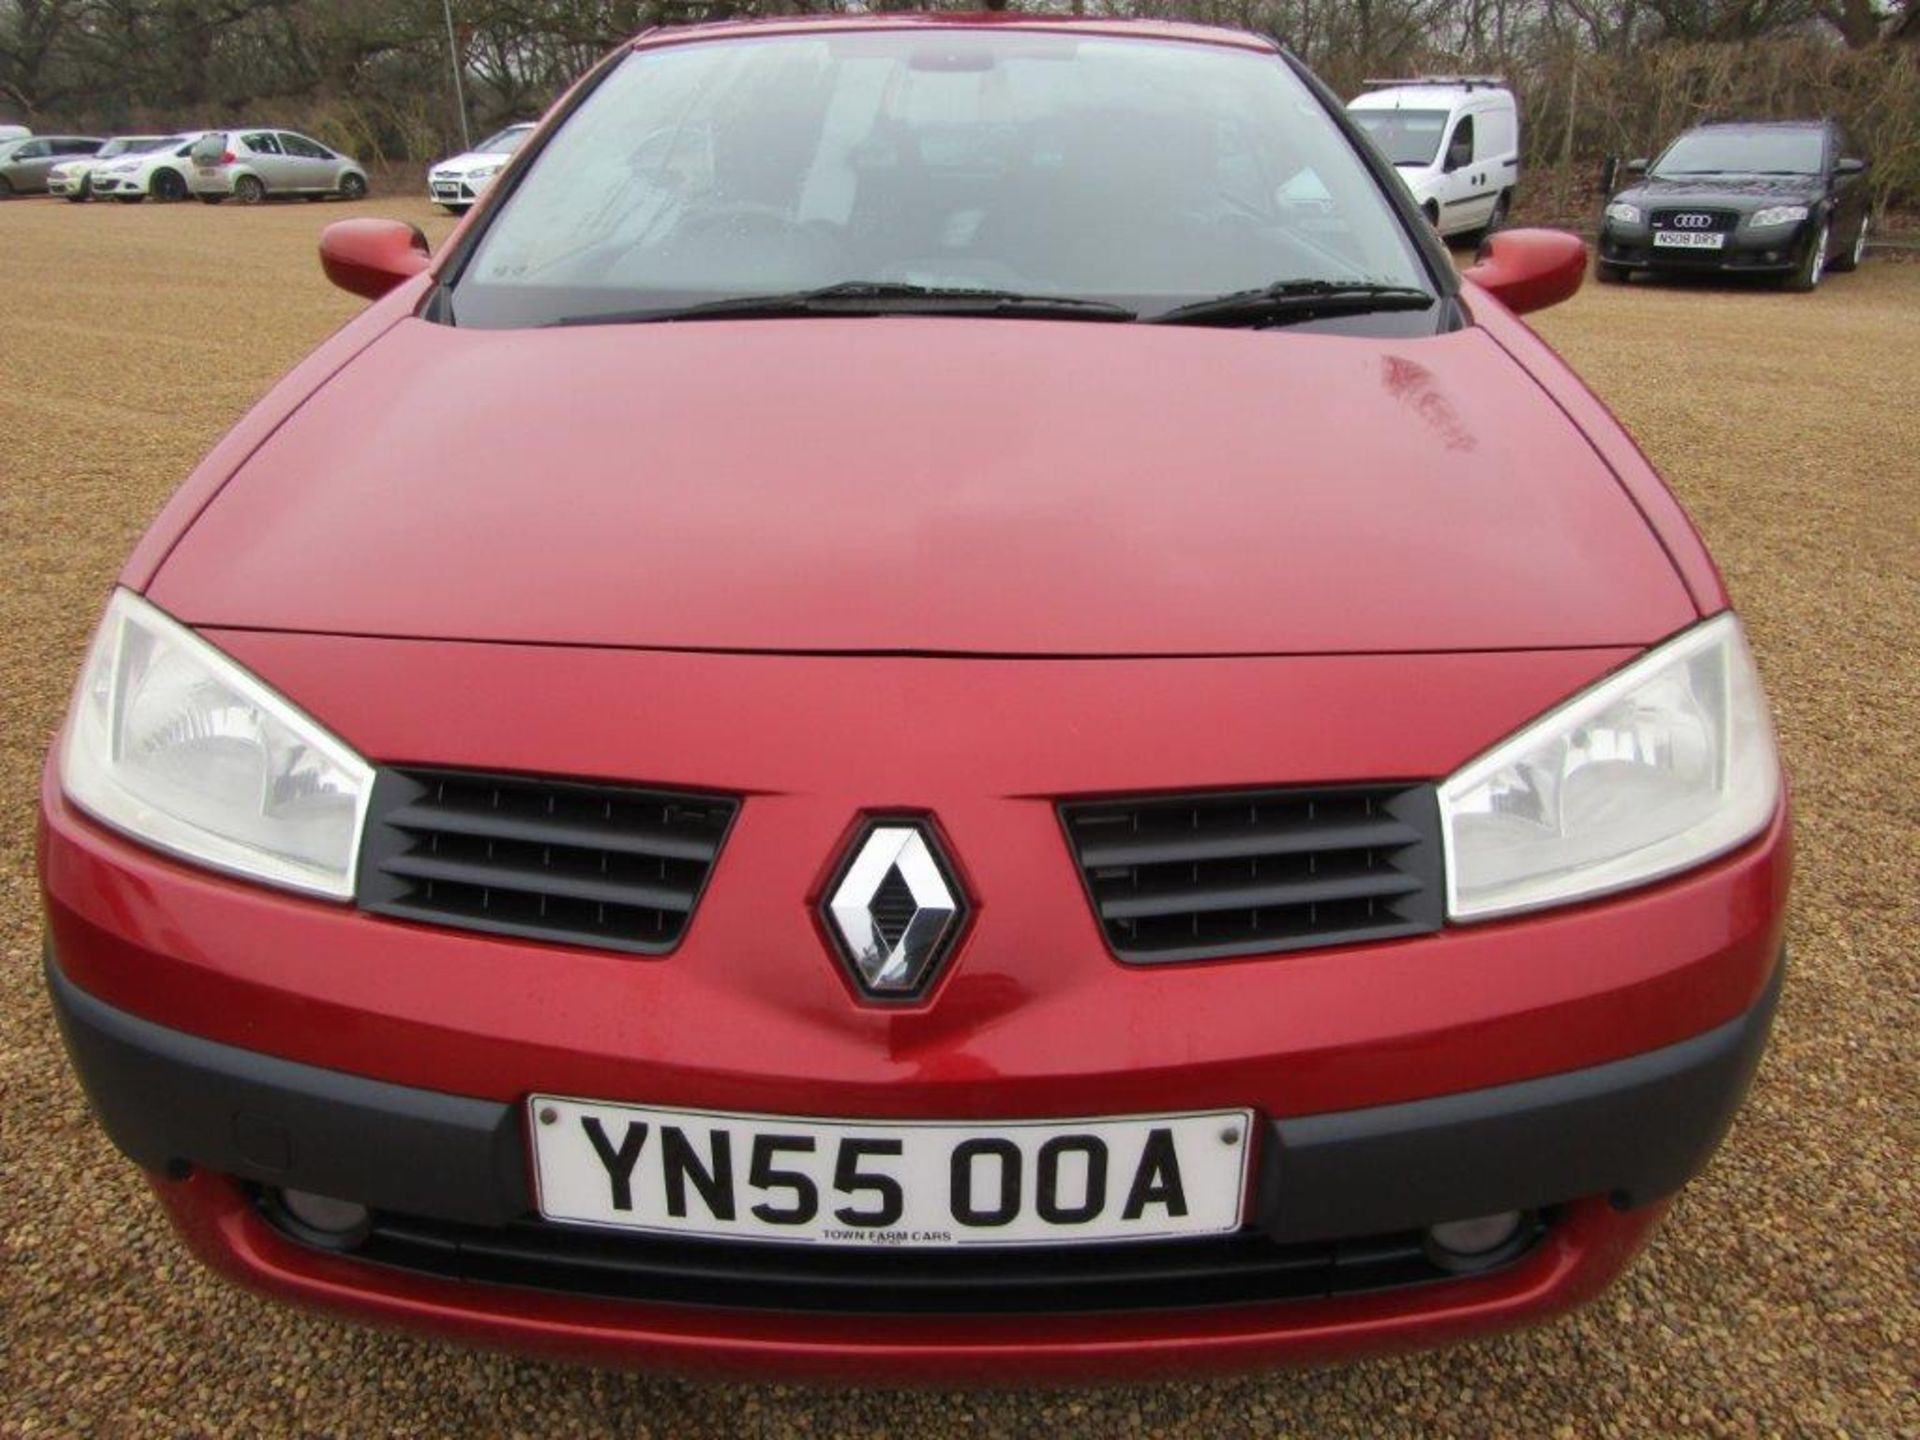 55 05 Renault Megane Coupe - Image 13 of 18